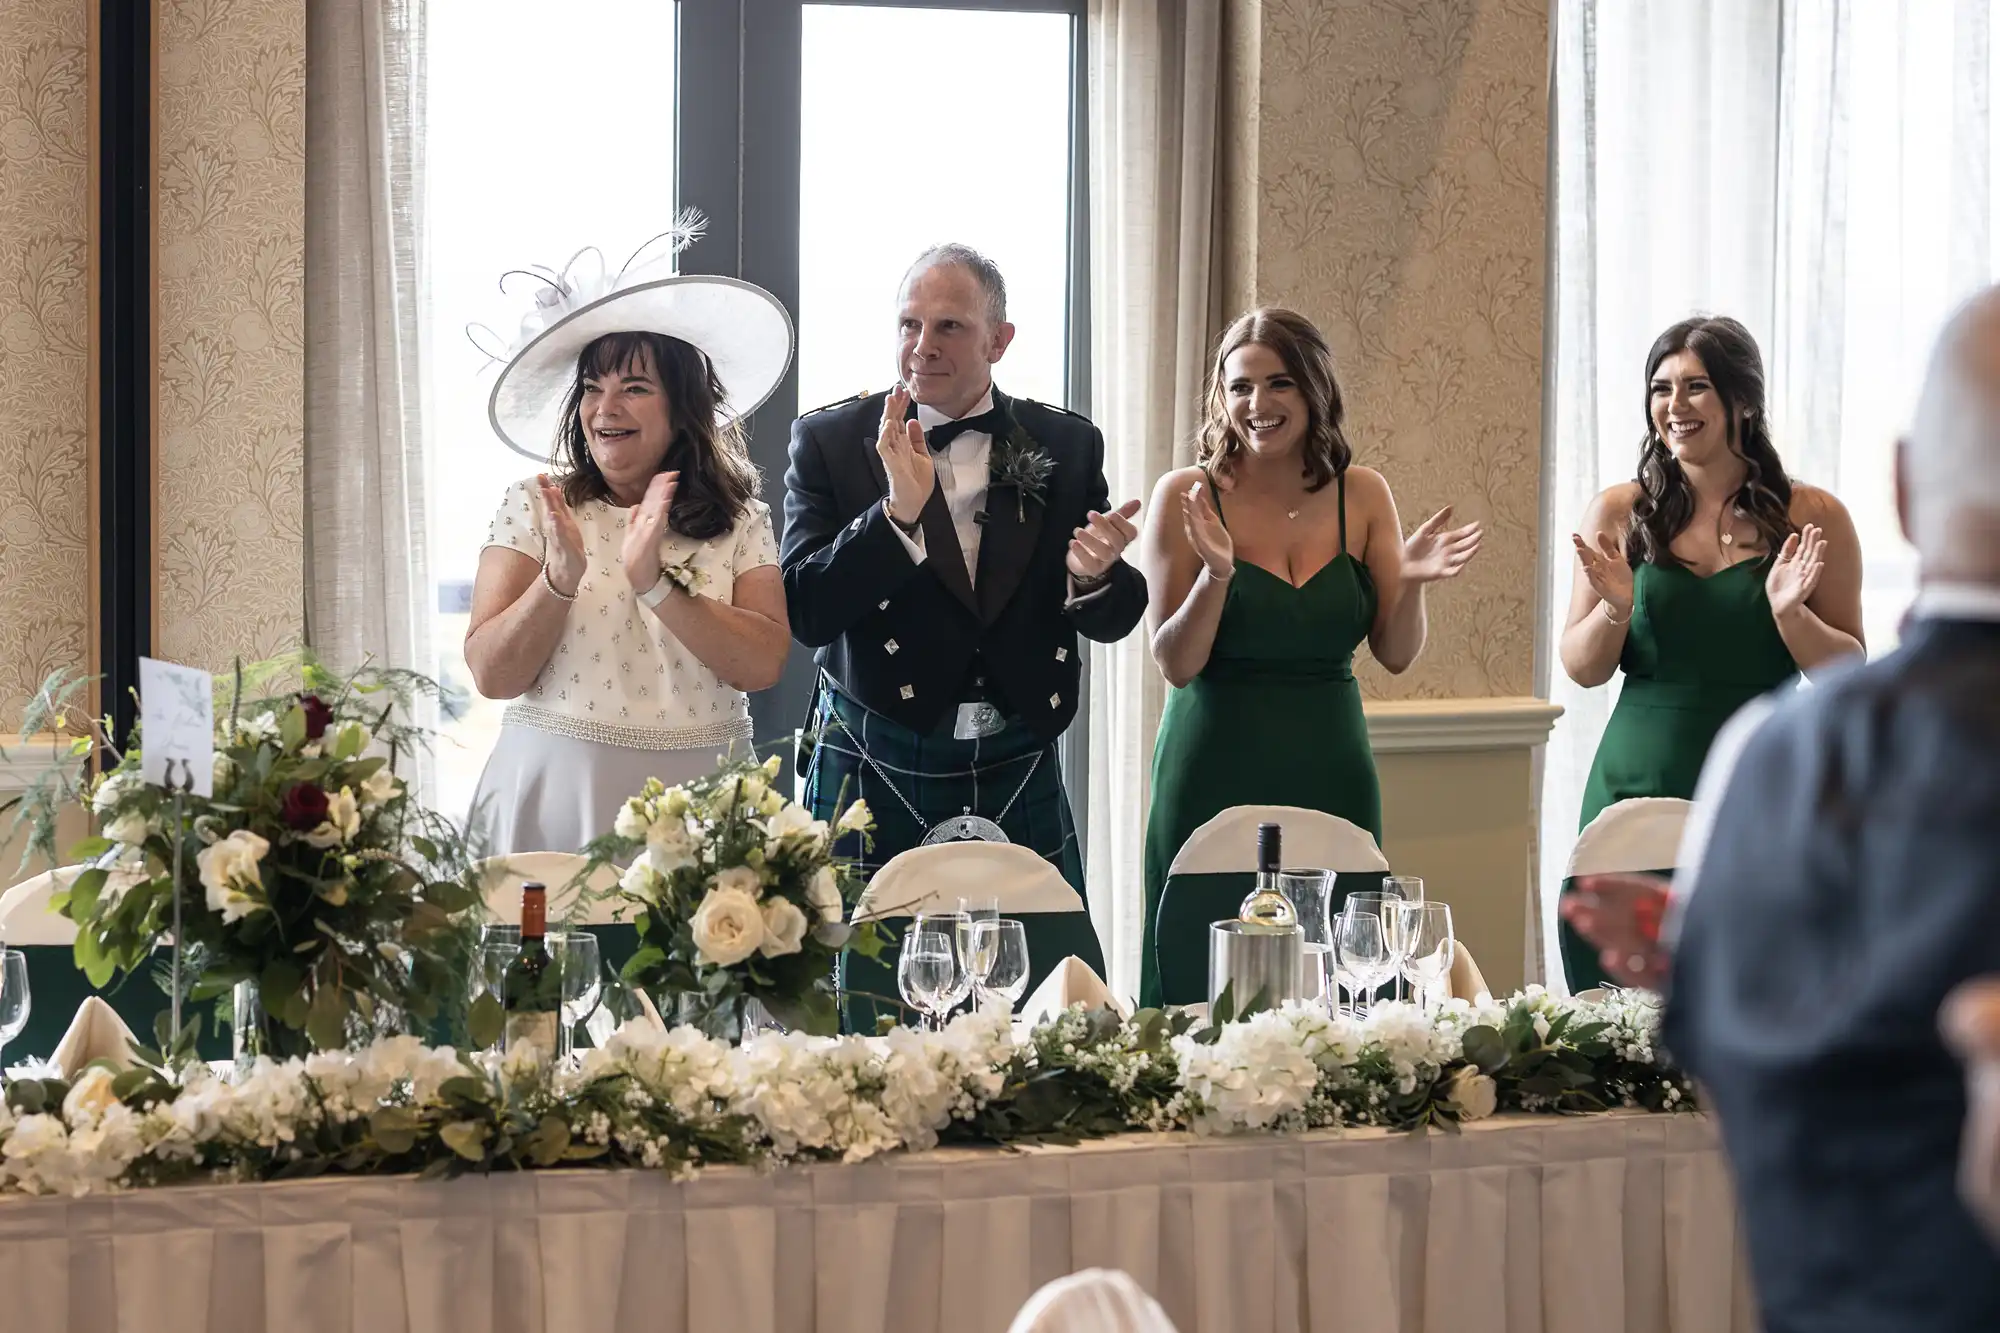 Four people stand applauding at a wedding reception, featuring two women in green dresses, a man in a suit, and a woman in a white outfit with a hat.